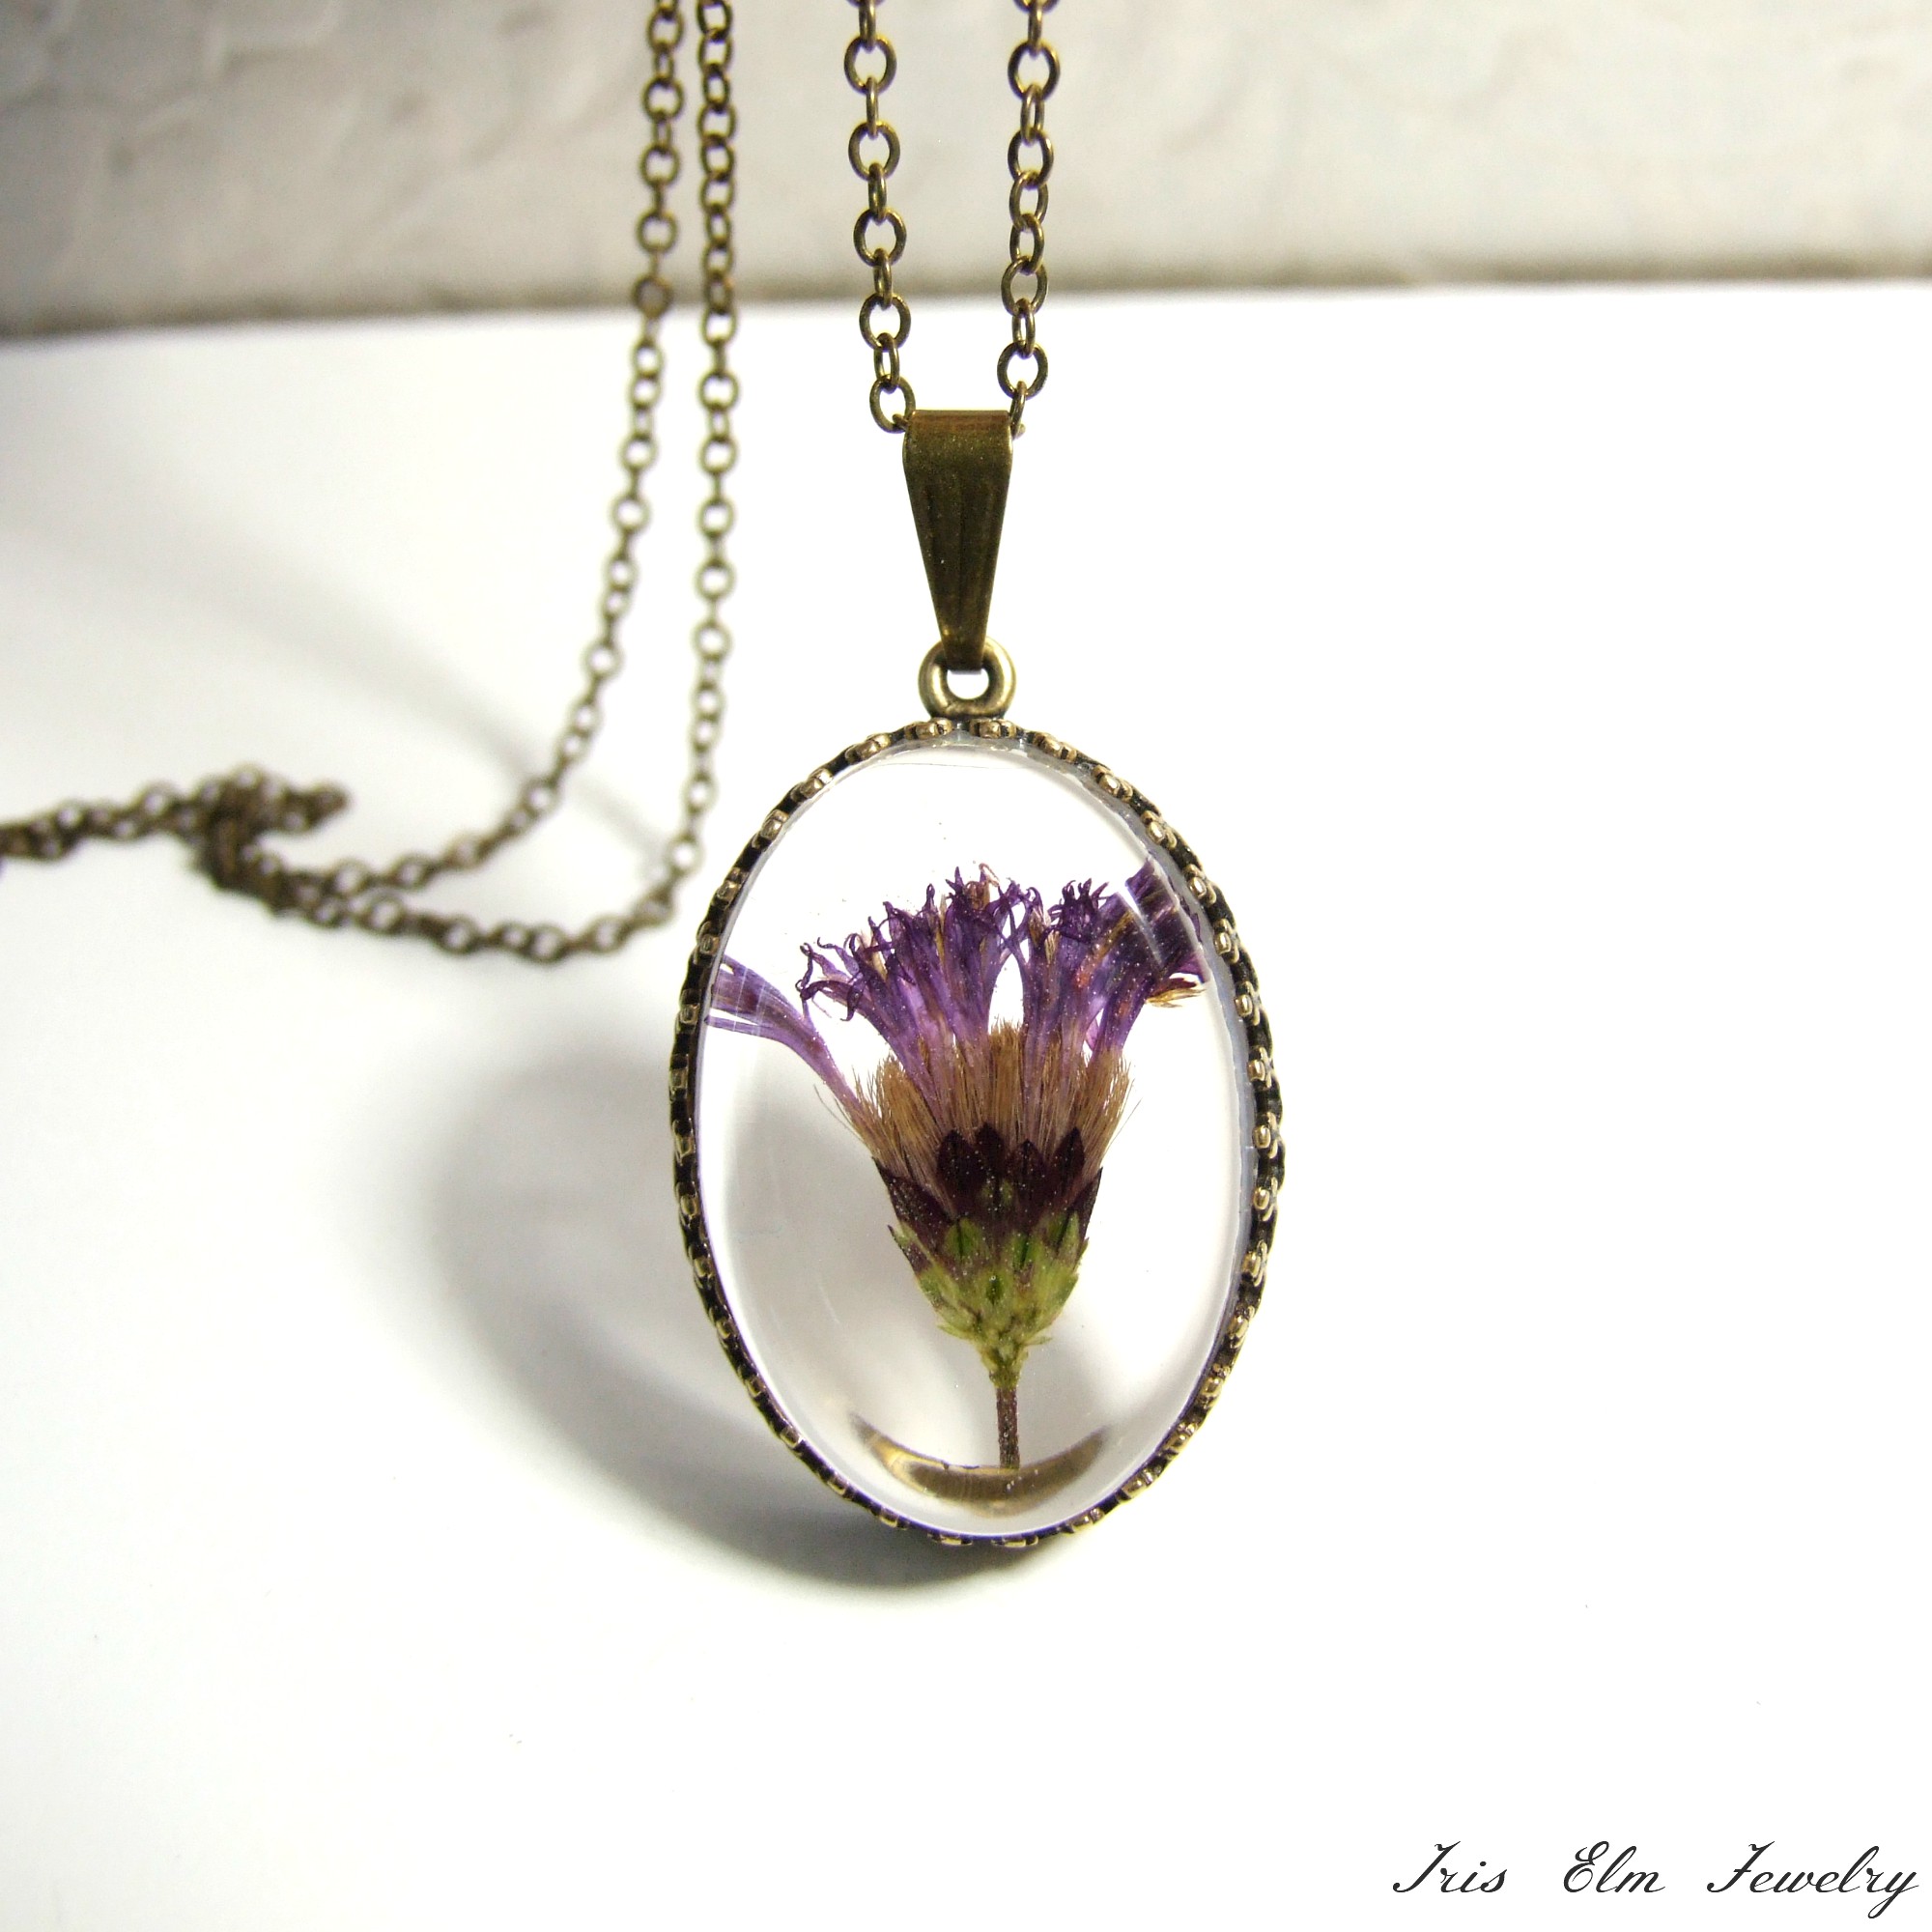 Real Wildflower Resin Necklace with Silver Bead Chain